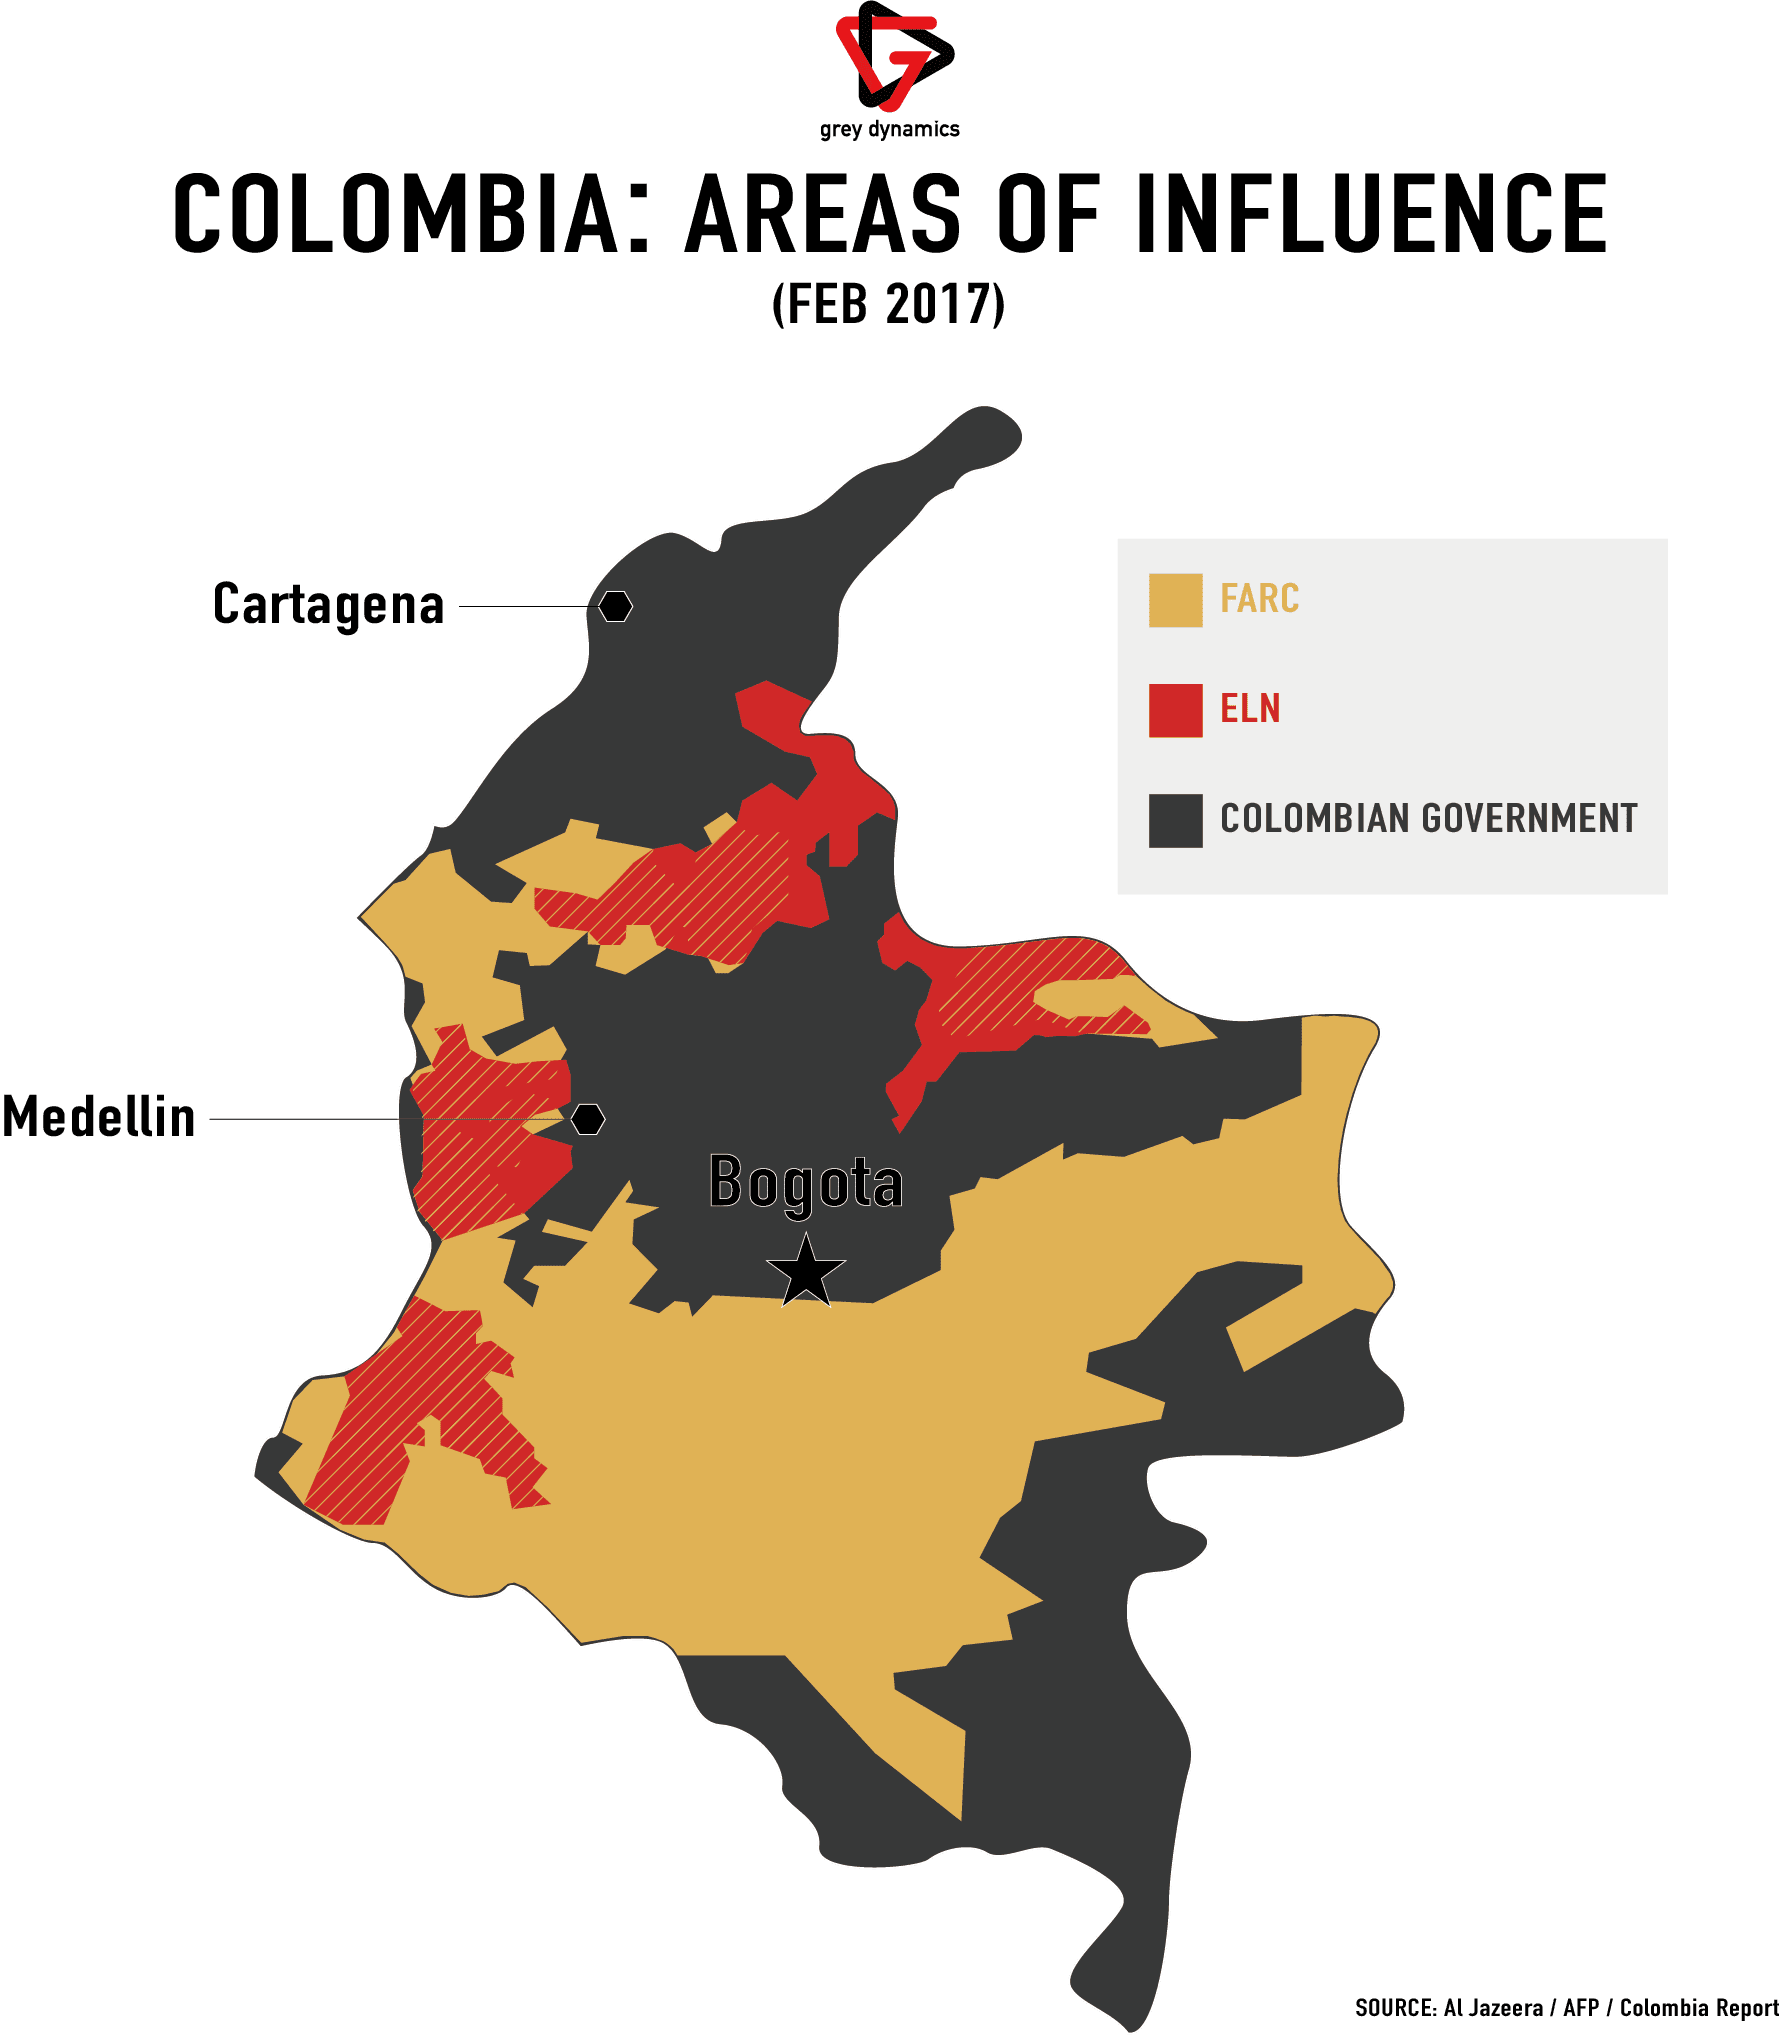 Colombia Peace